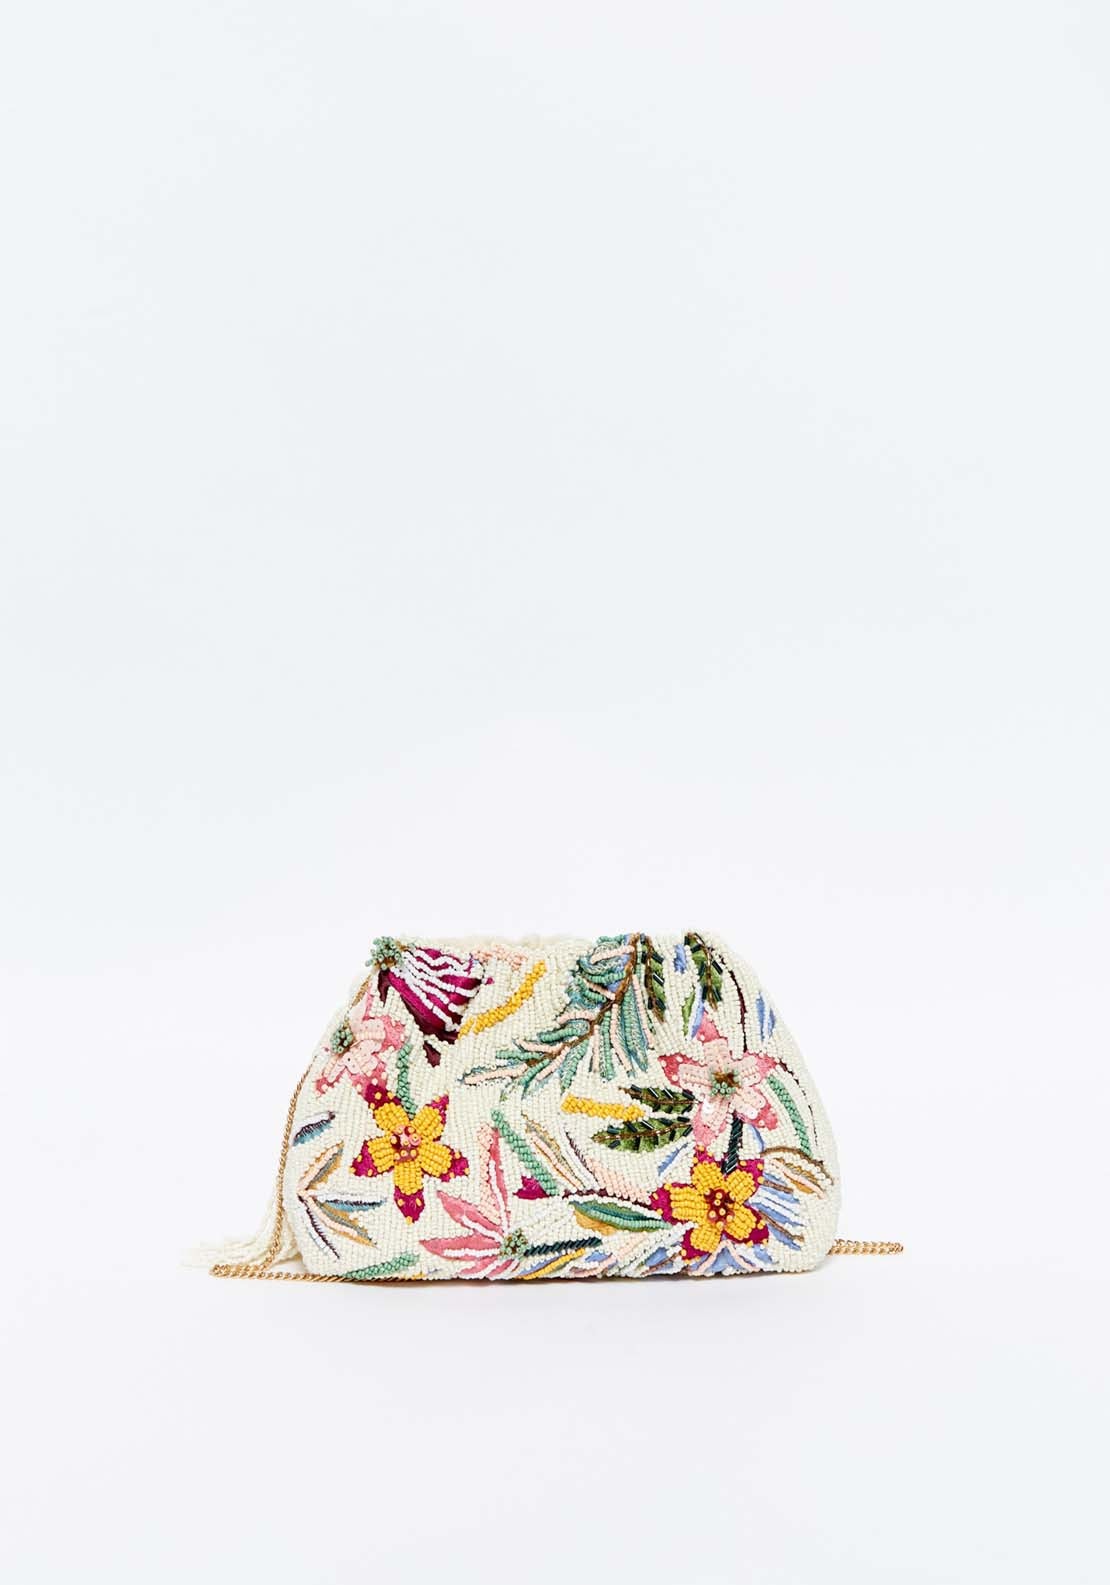 Sfera Flowers beaded bag 1 Shaws Department Stores